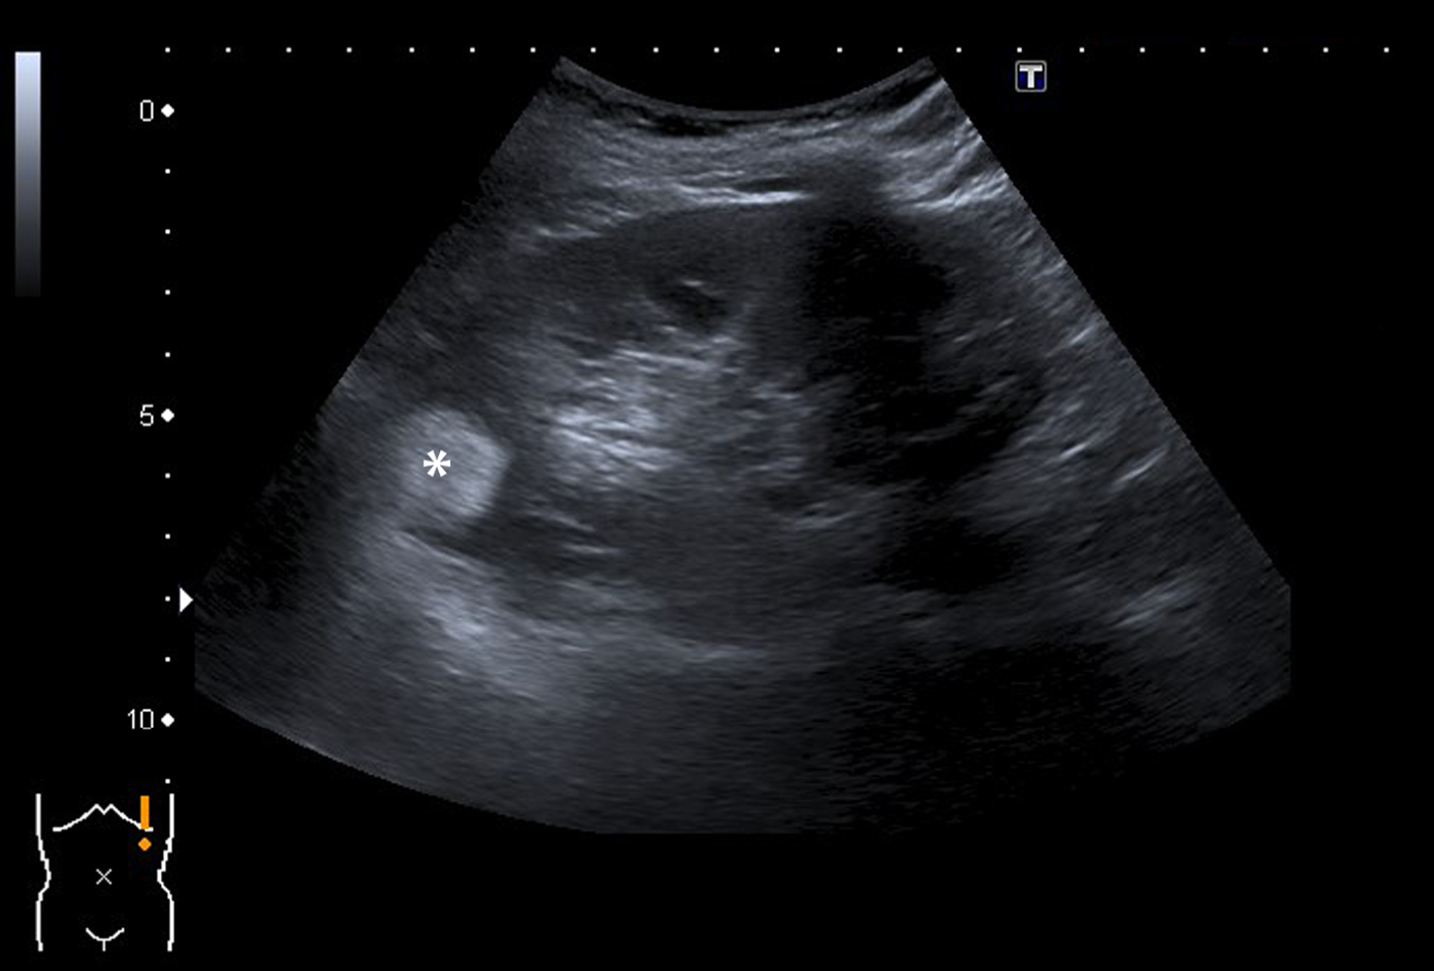 A 63-year-old women was referred for follow up of an angiomyolipoma previously diagnosed on CT scan. Ultrasound during follow up indeed showed a 25 mm large, strong hyperechoic tumor (marked with an asterix) in the upperpole of the left kidney consistent with an angiomyolipoma. The echogenicity corresponds with a composition of fat, also when compared to fat in the renal hilum.